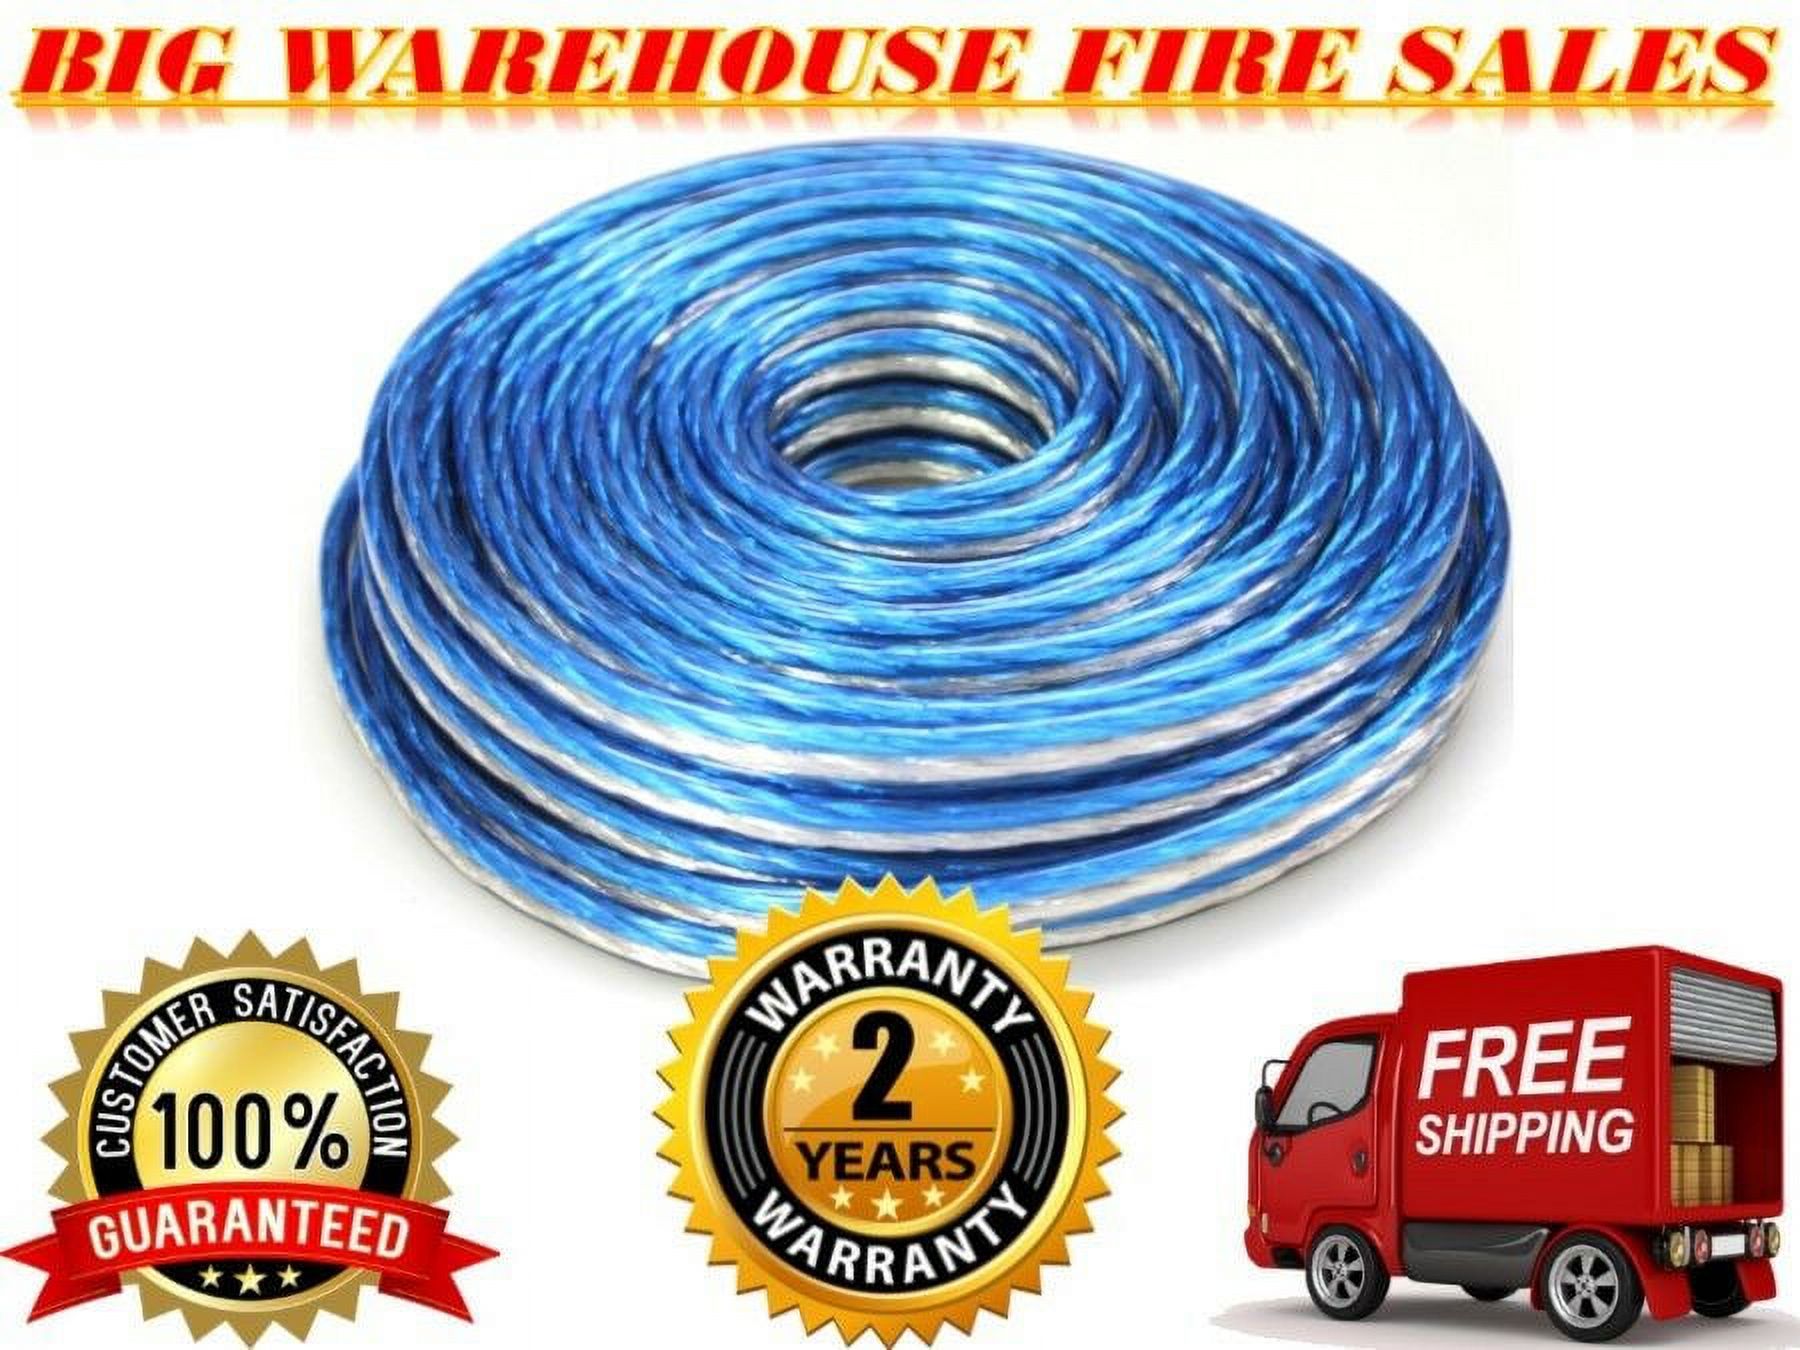 PRO Blue/Silver 25 Ft True 10 Gauge Marine Car, Home Audio Speaker Wire Cable - image 1 of 2